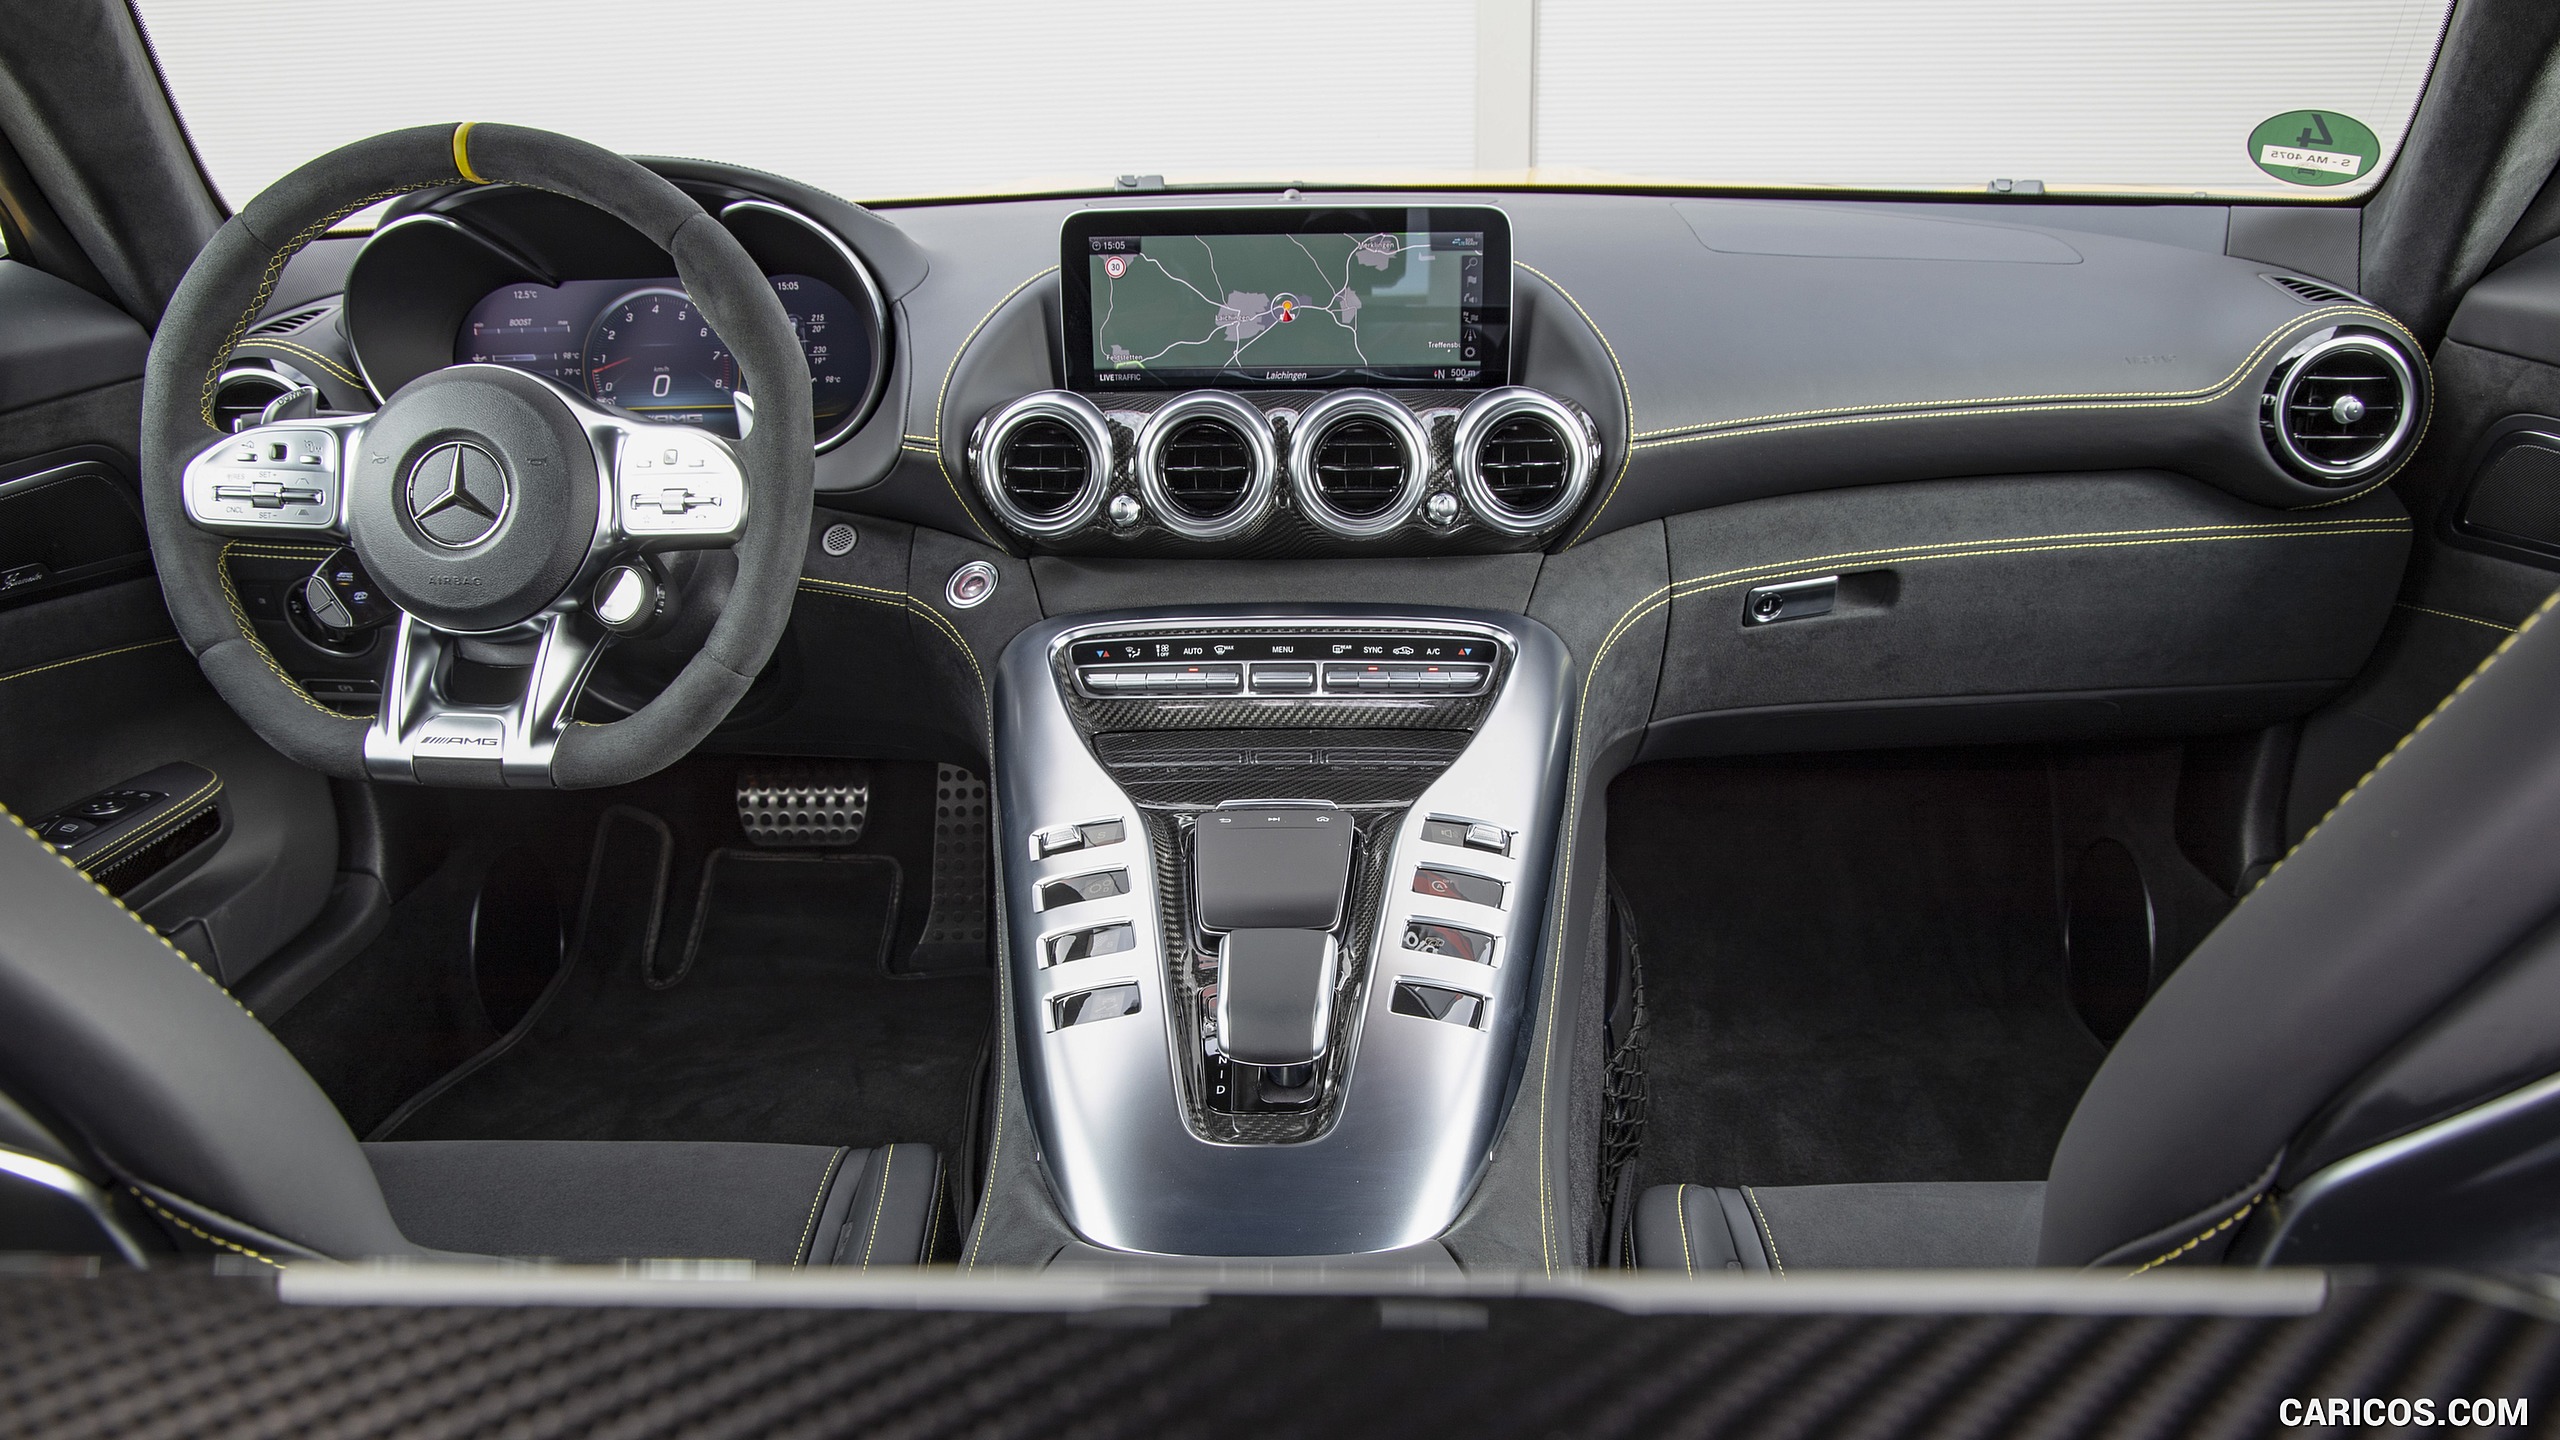 2020 Mercedes-AMG S Coupe - Interior, Cockpit, #87 of 328